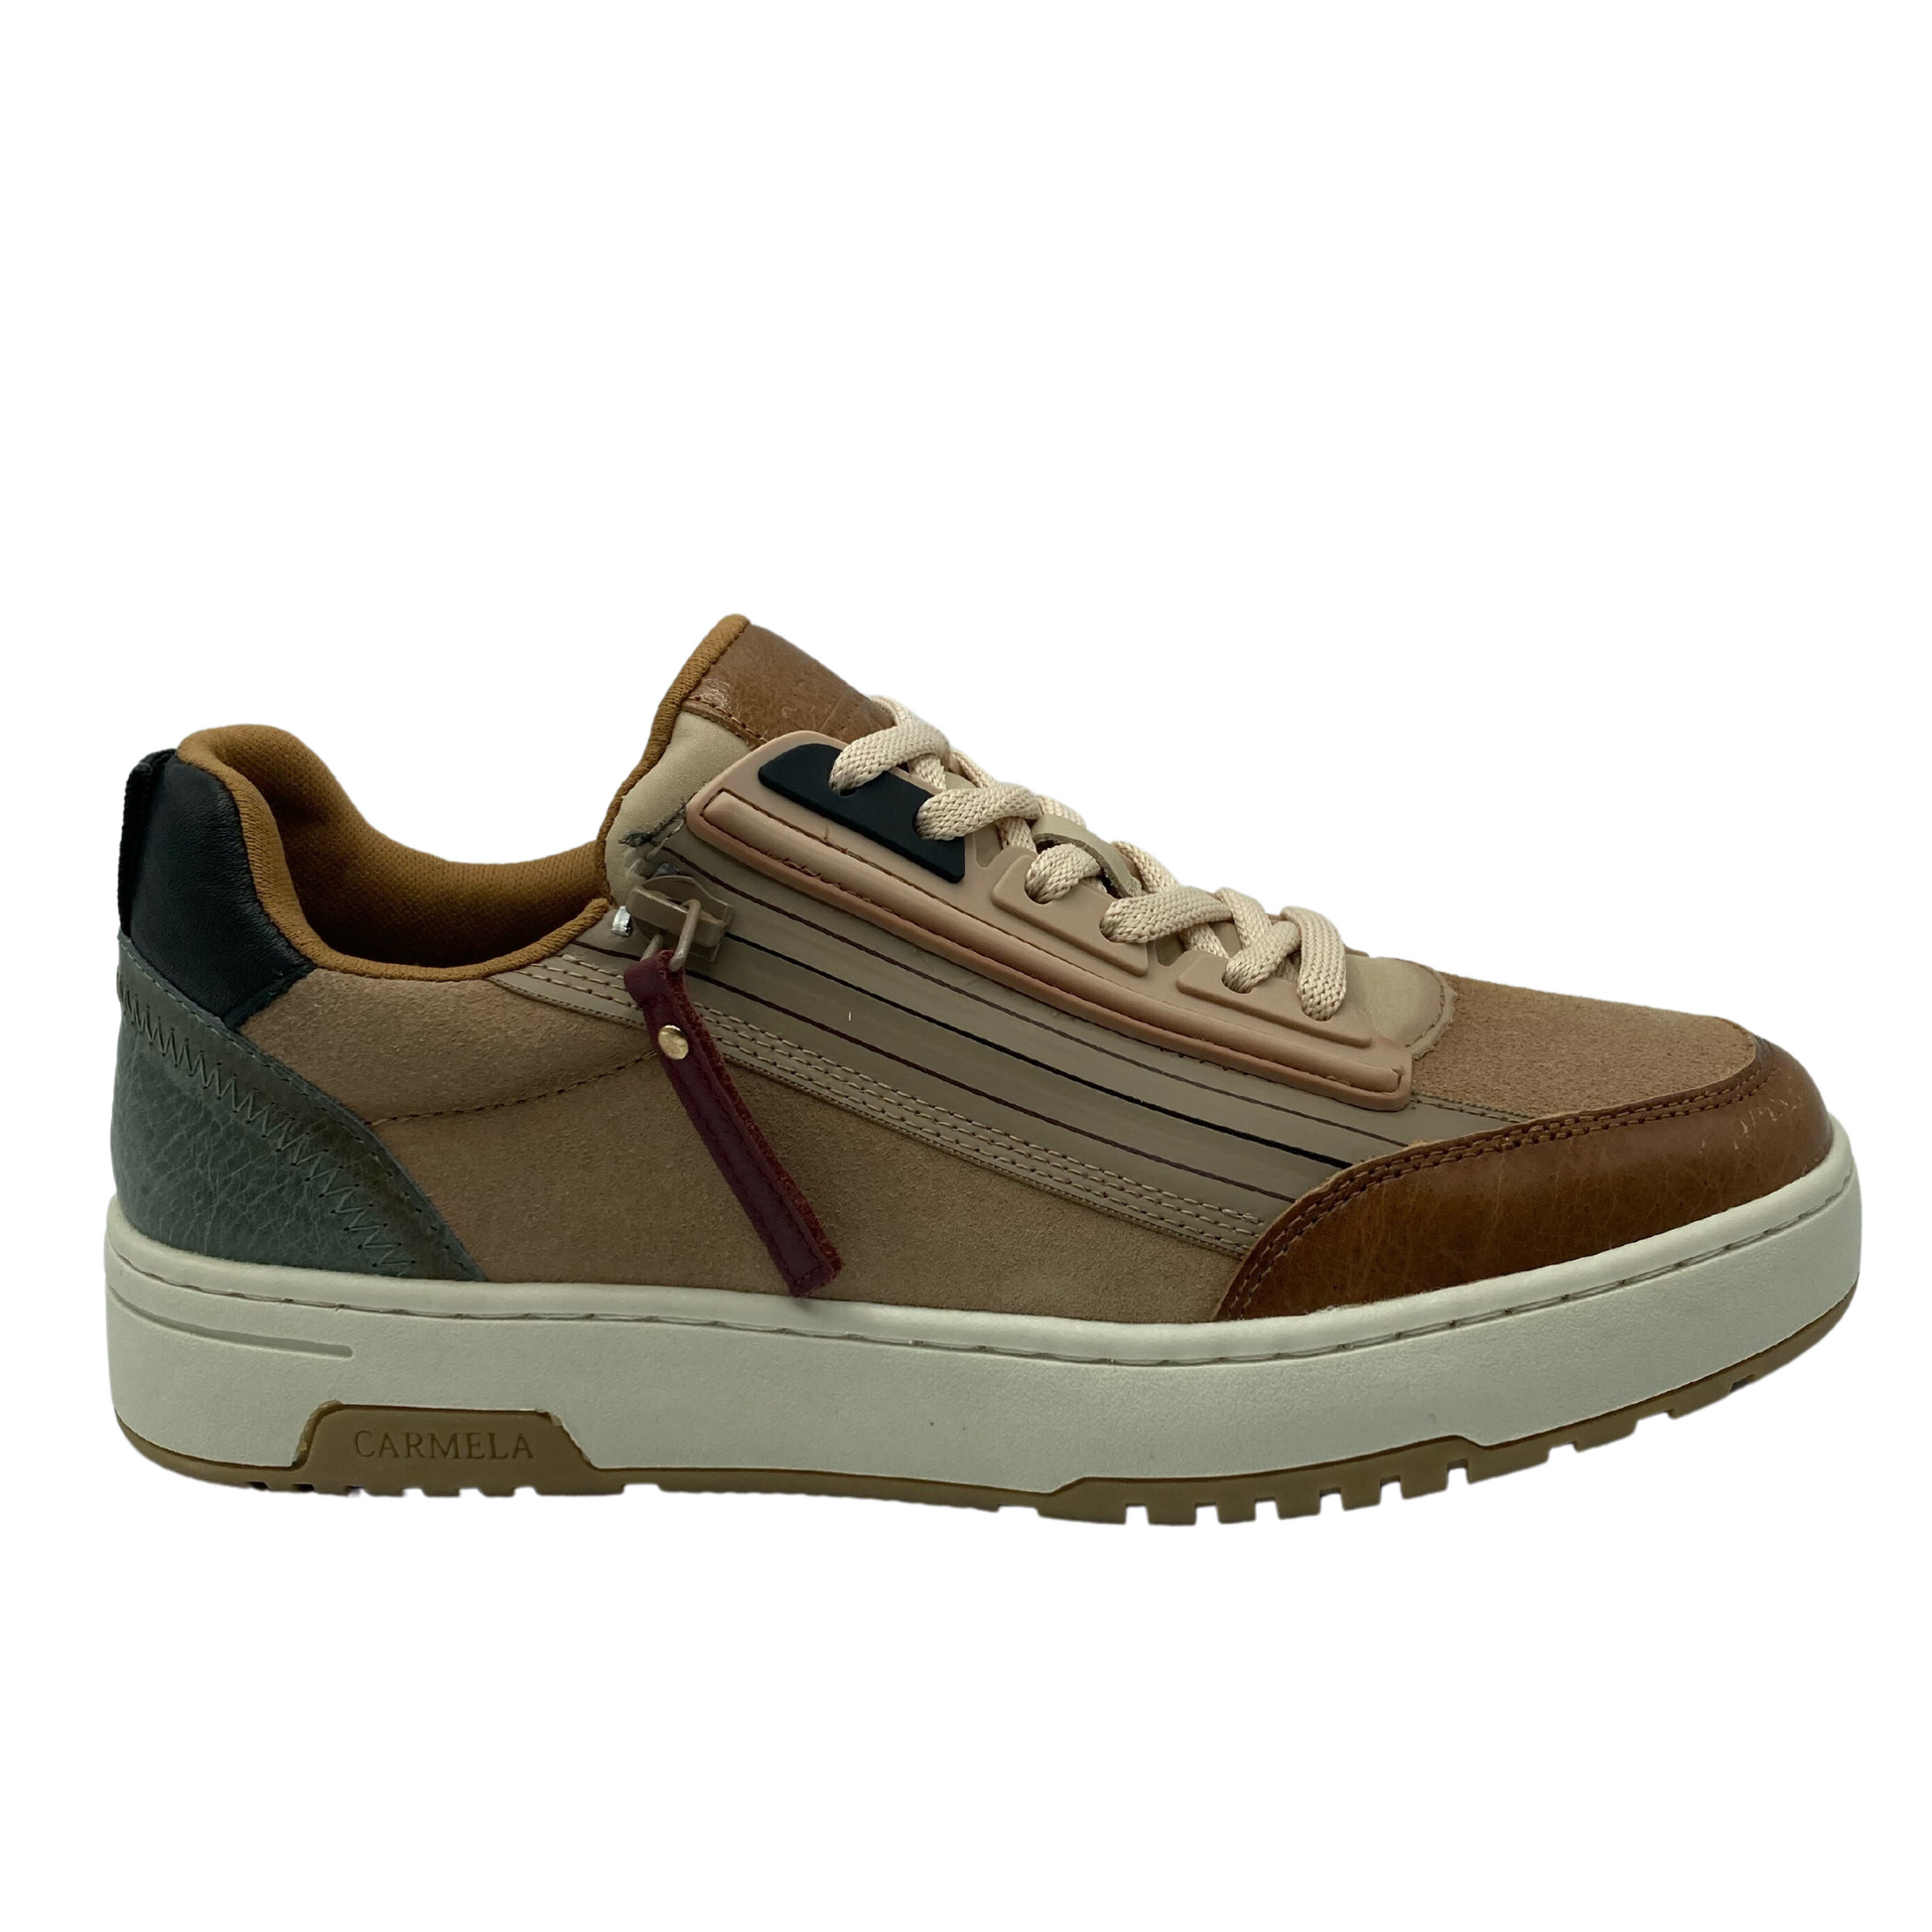 Right facing view of brown leather sneaker with white rubber outsole